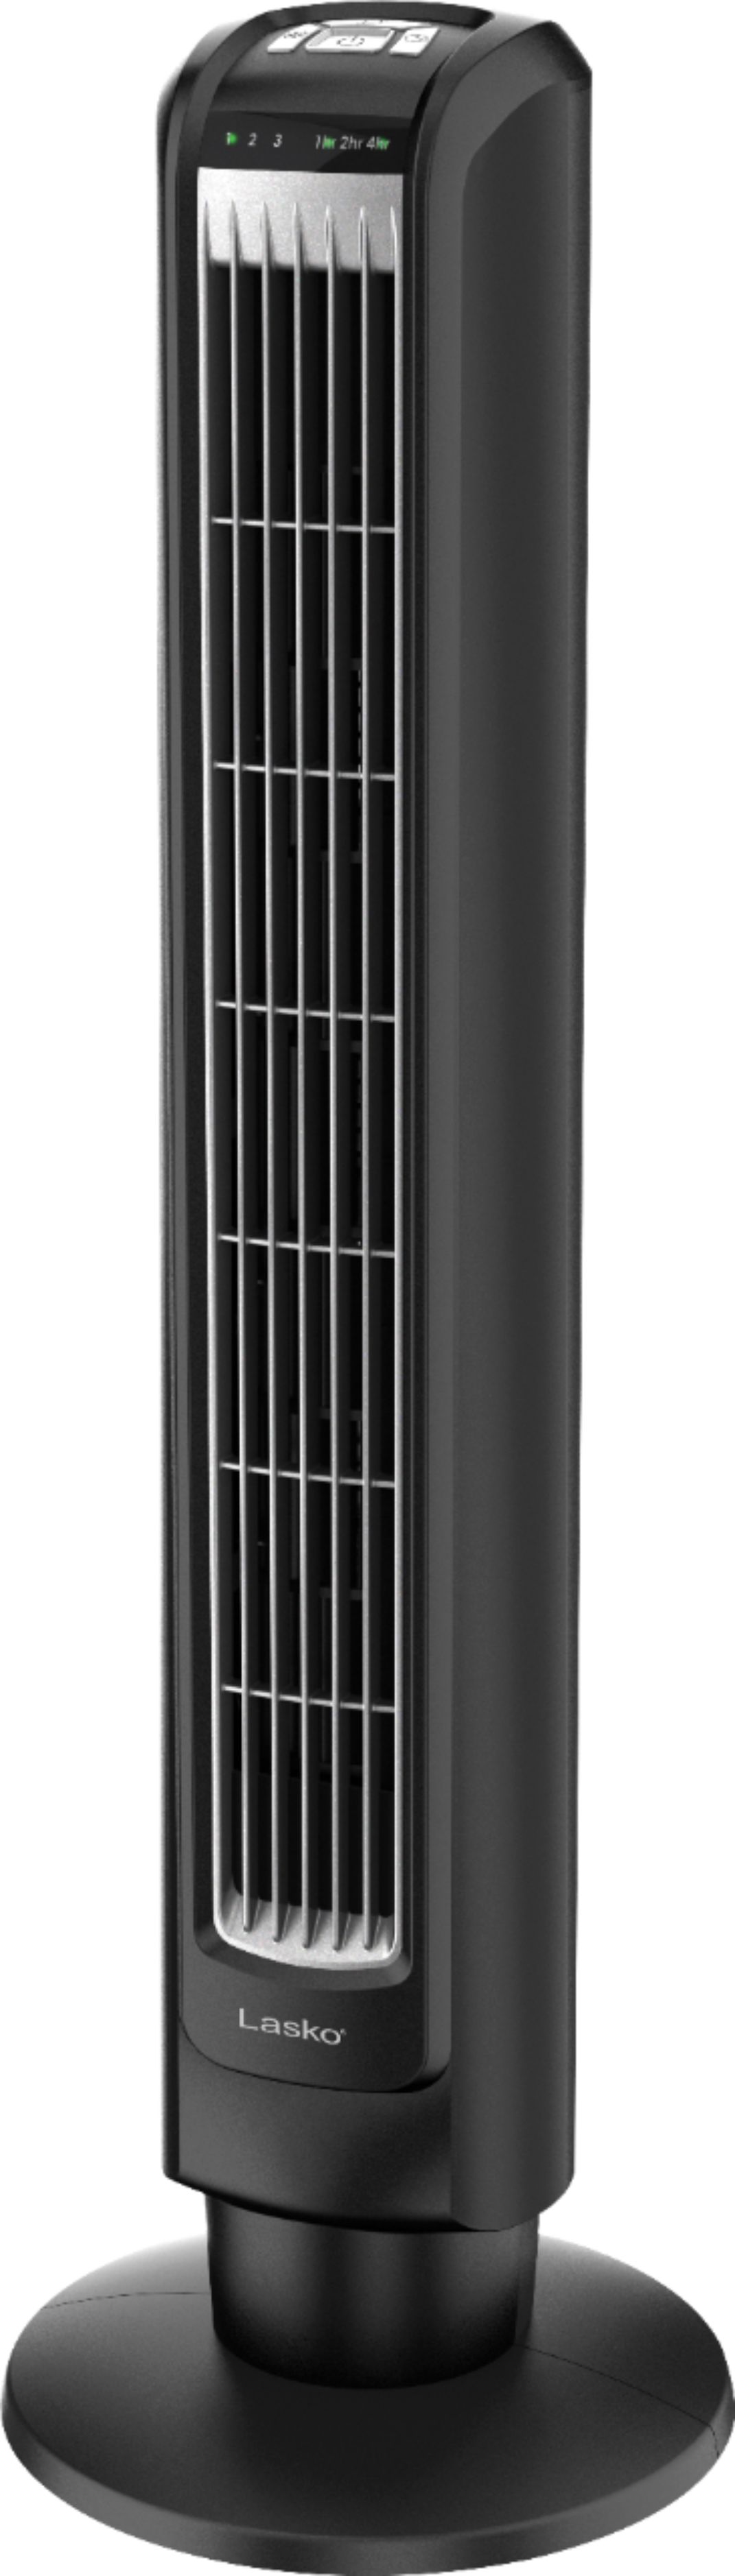 Angle View: GermGuardian - 167 Sq Ft 4-in-1 True HEPA Air Purifier - Black/Silver